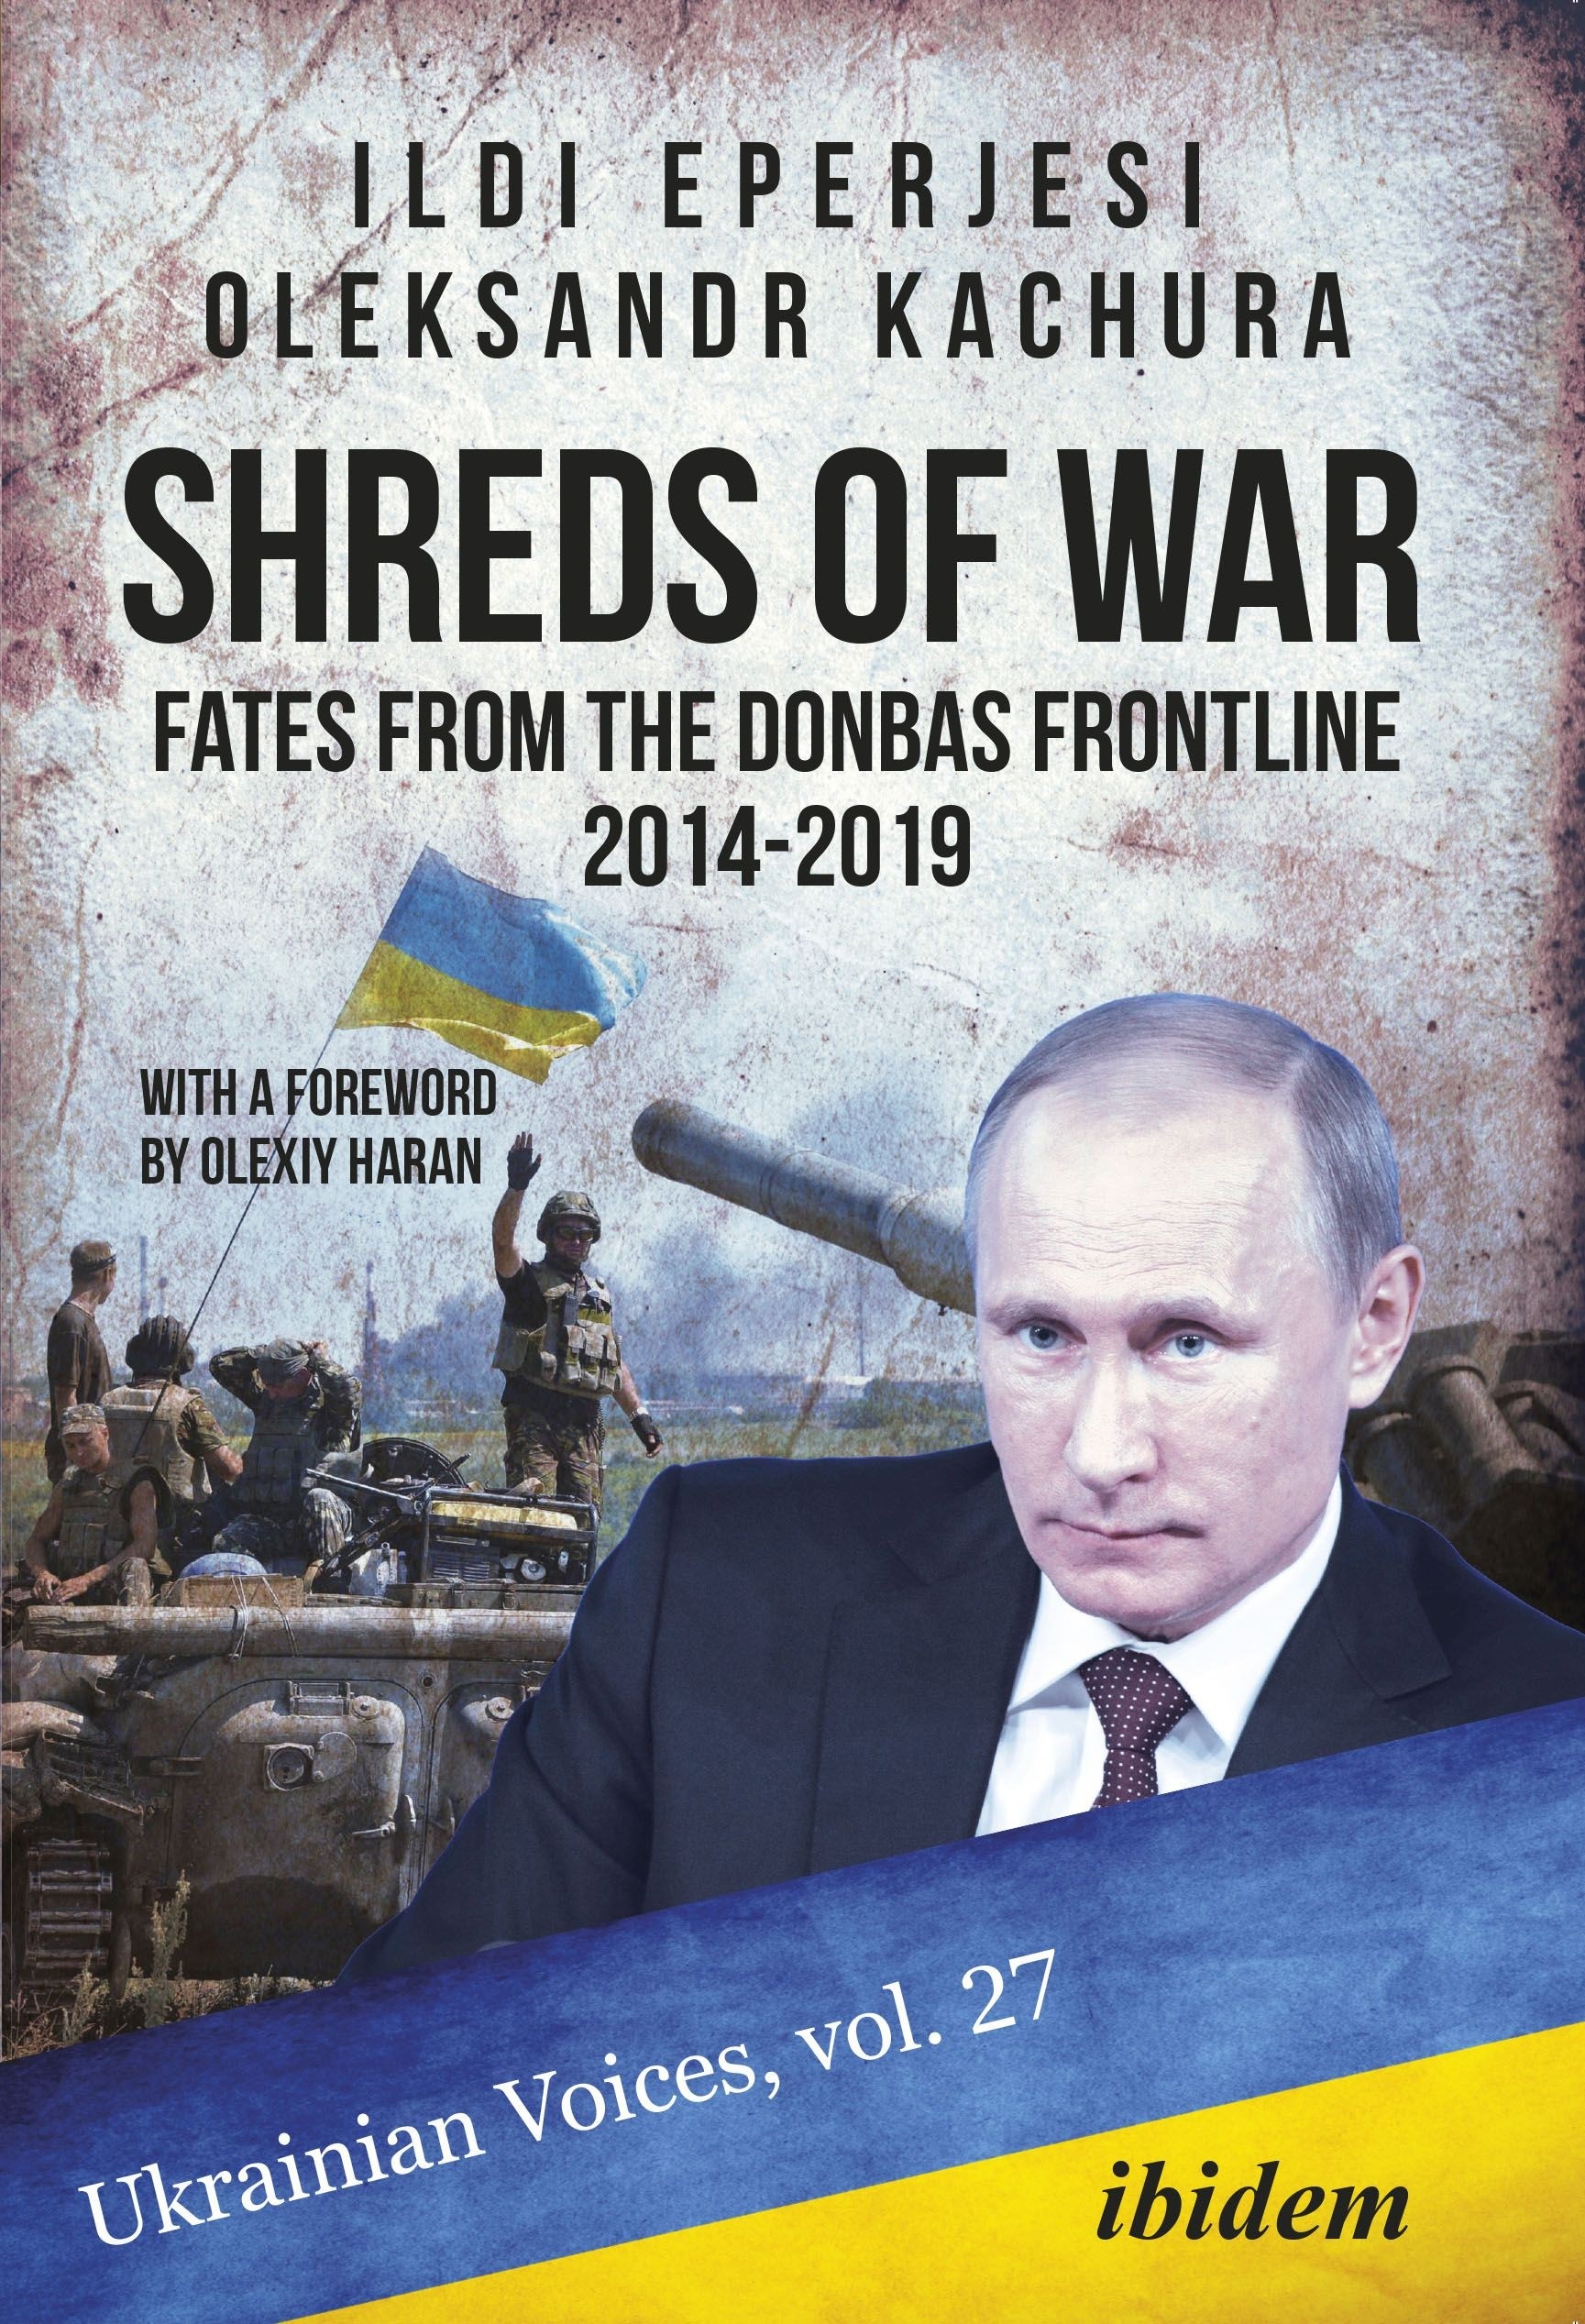 Shreds of War: Fates from the Donbas Frontline 2014-2019